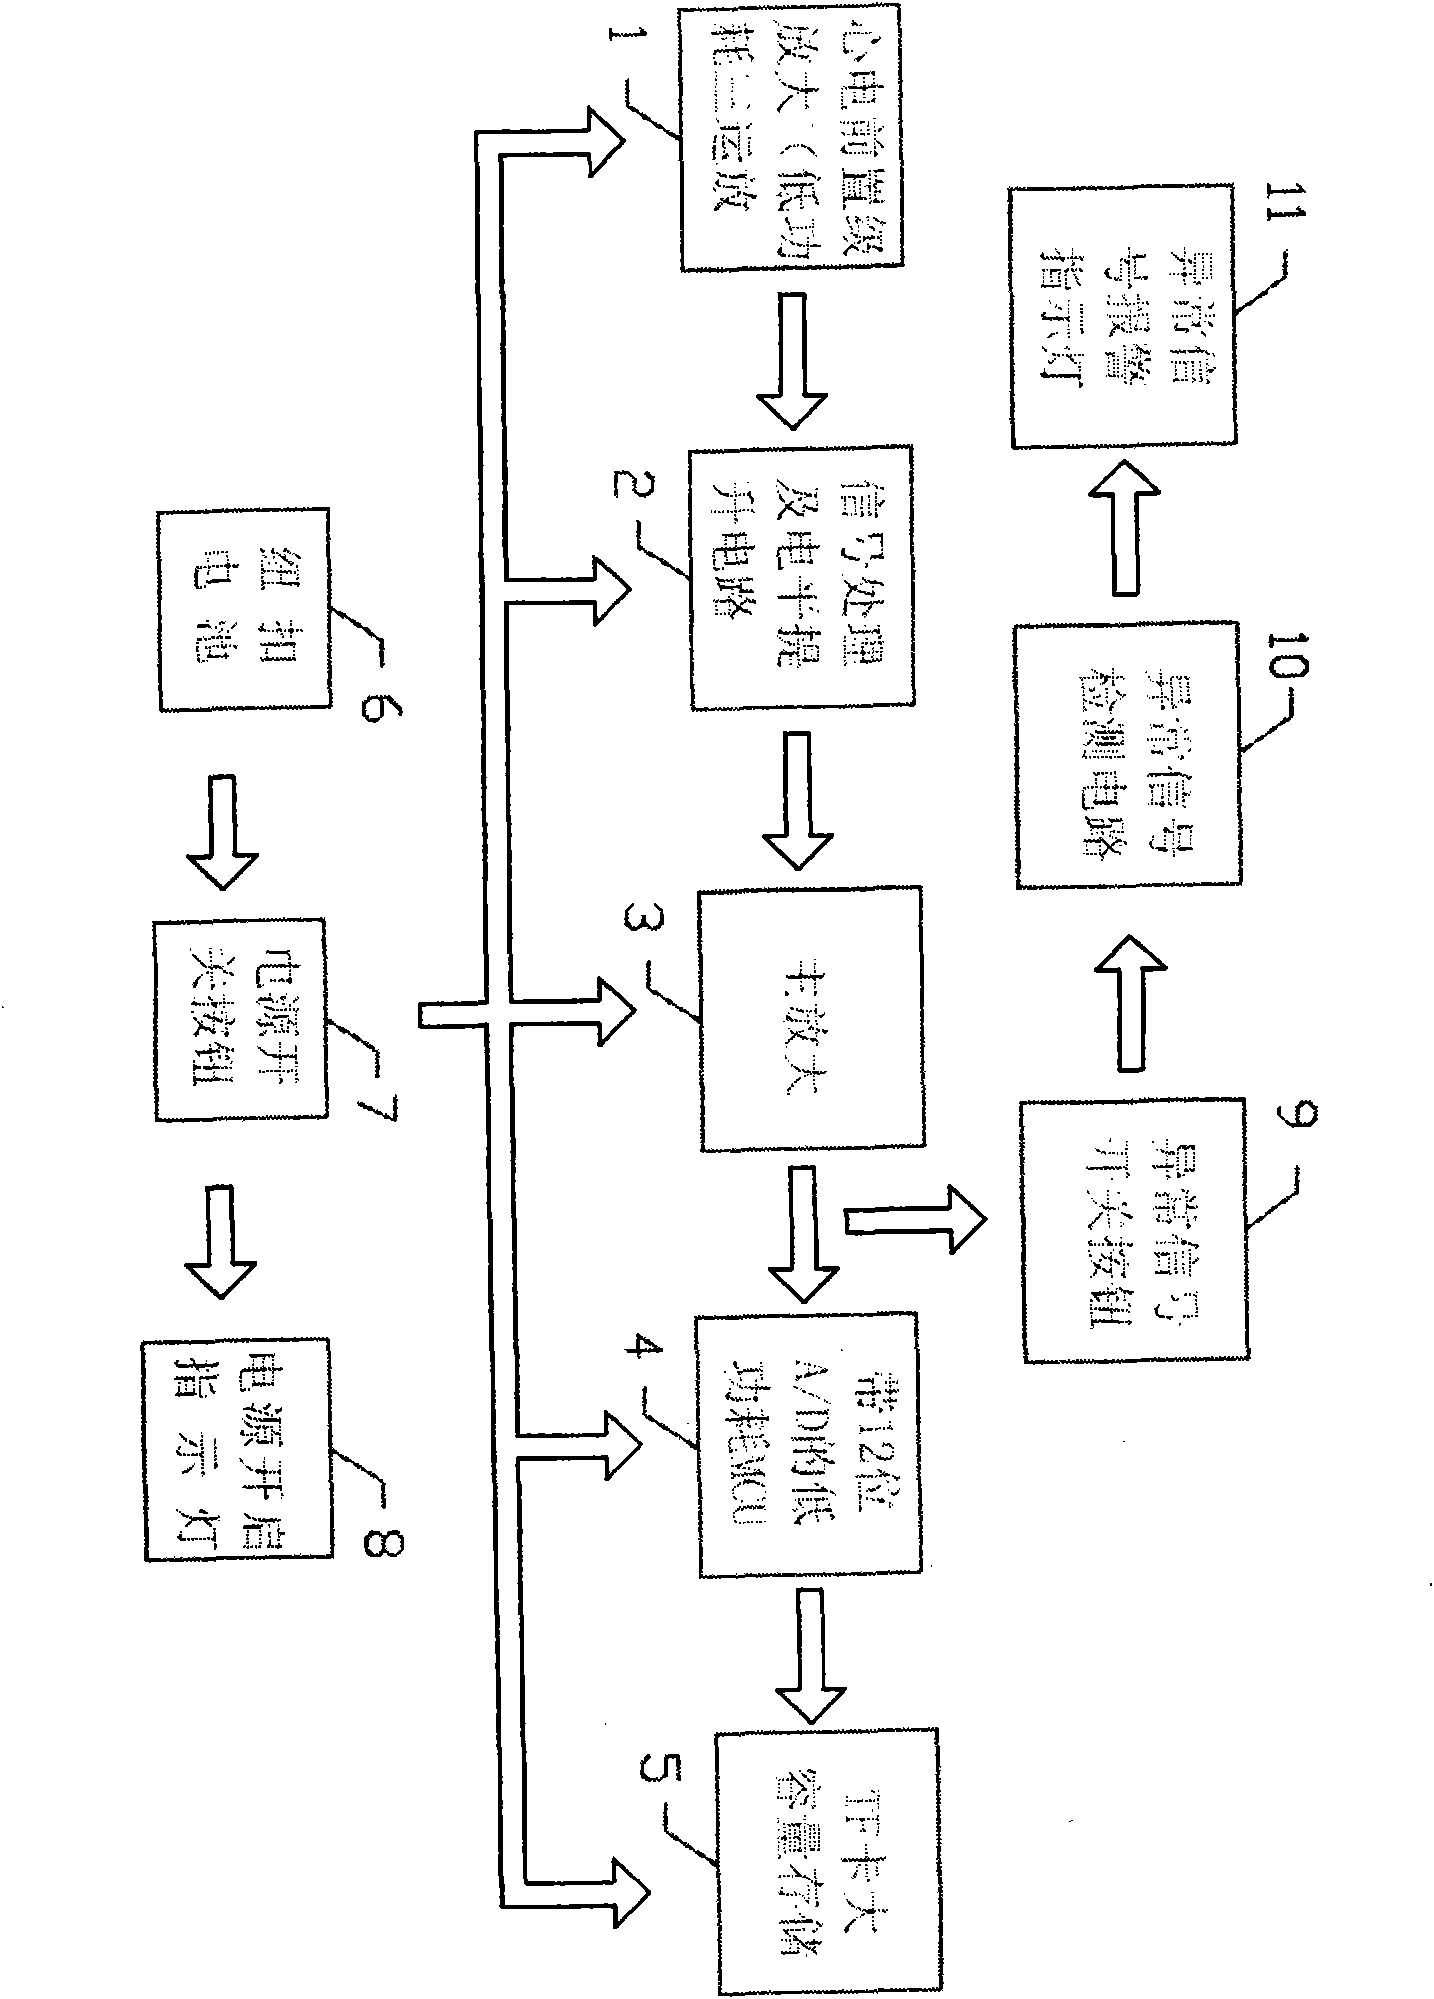 Non-invasive attached telemetering electrocardiographic recording method and system having ultra-long record period and ultra-high storage capacity